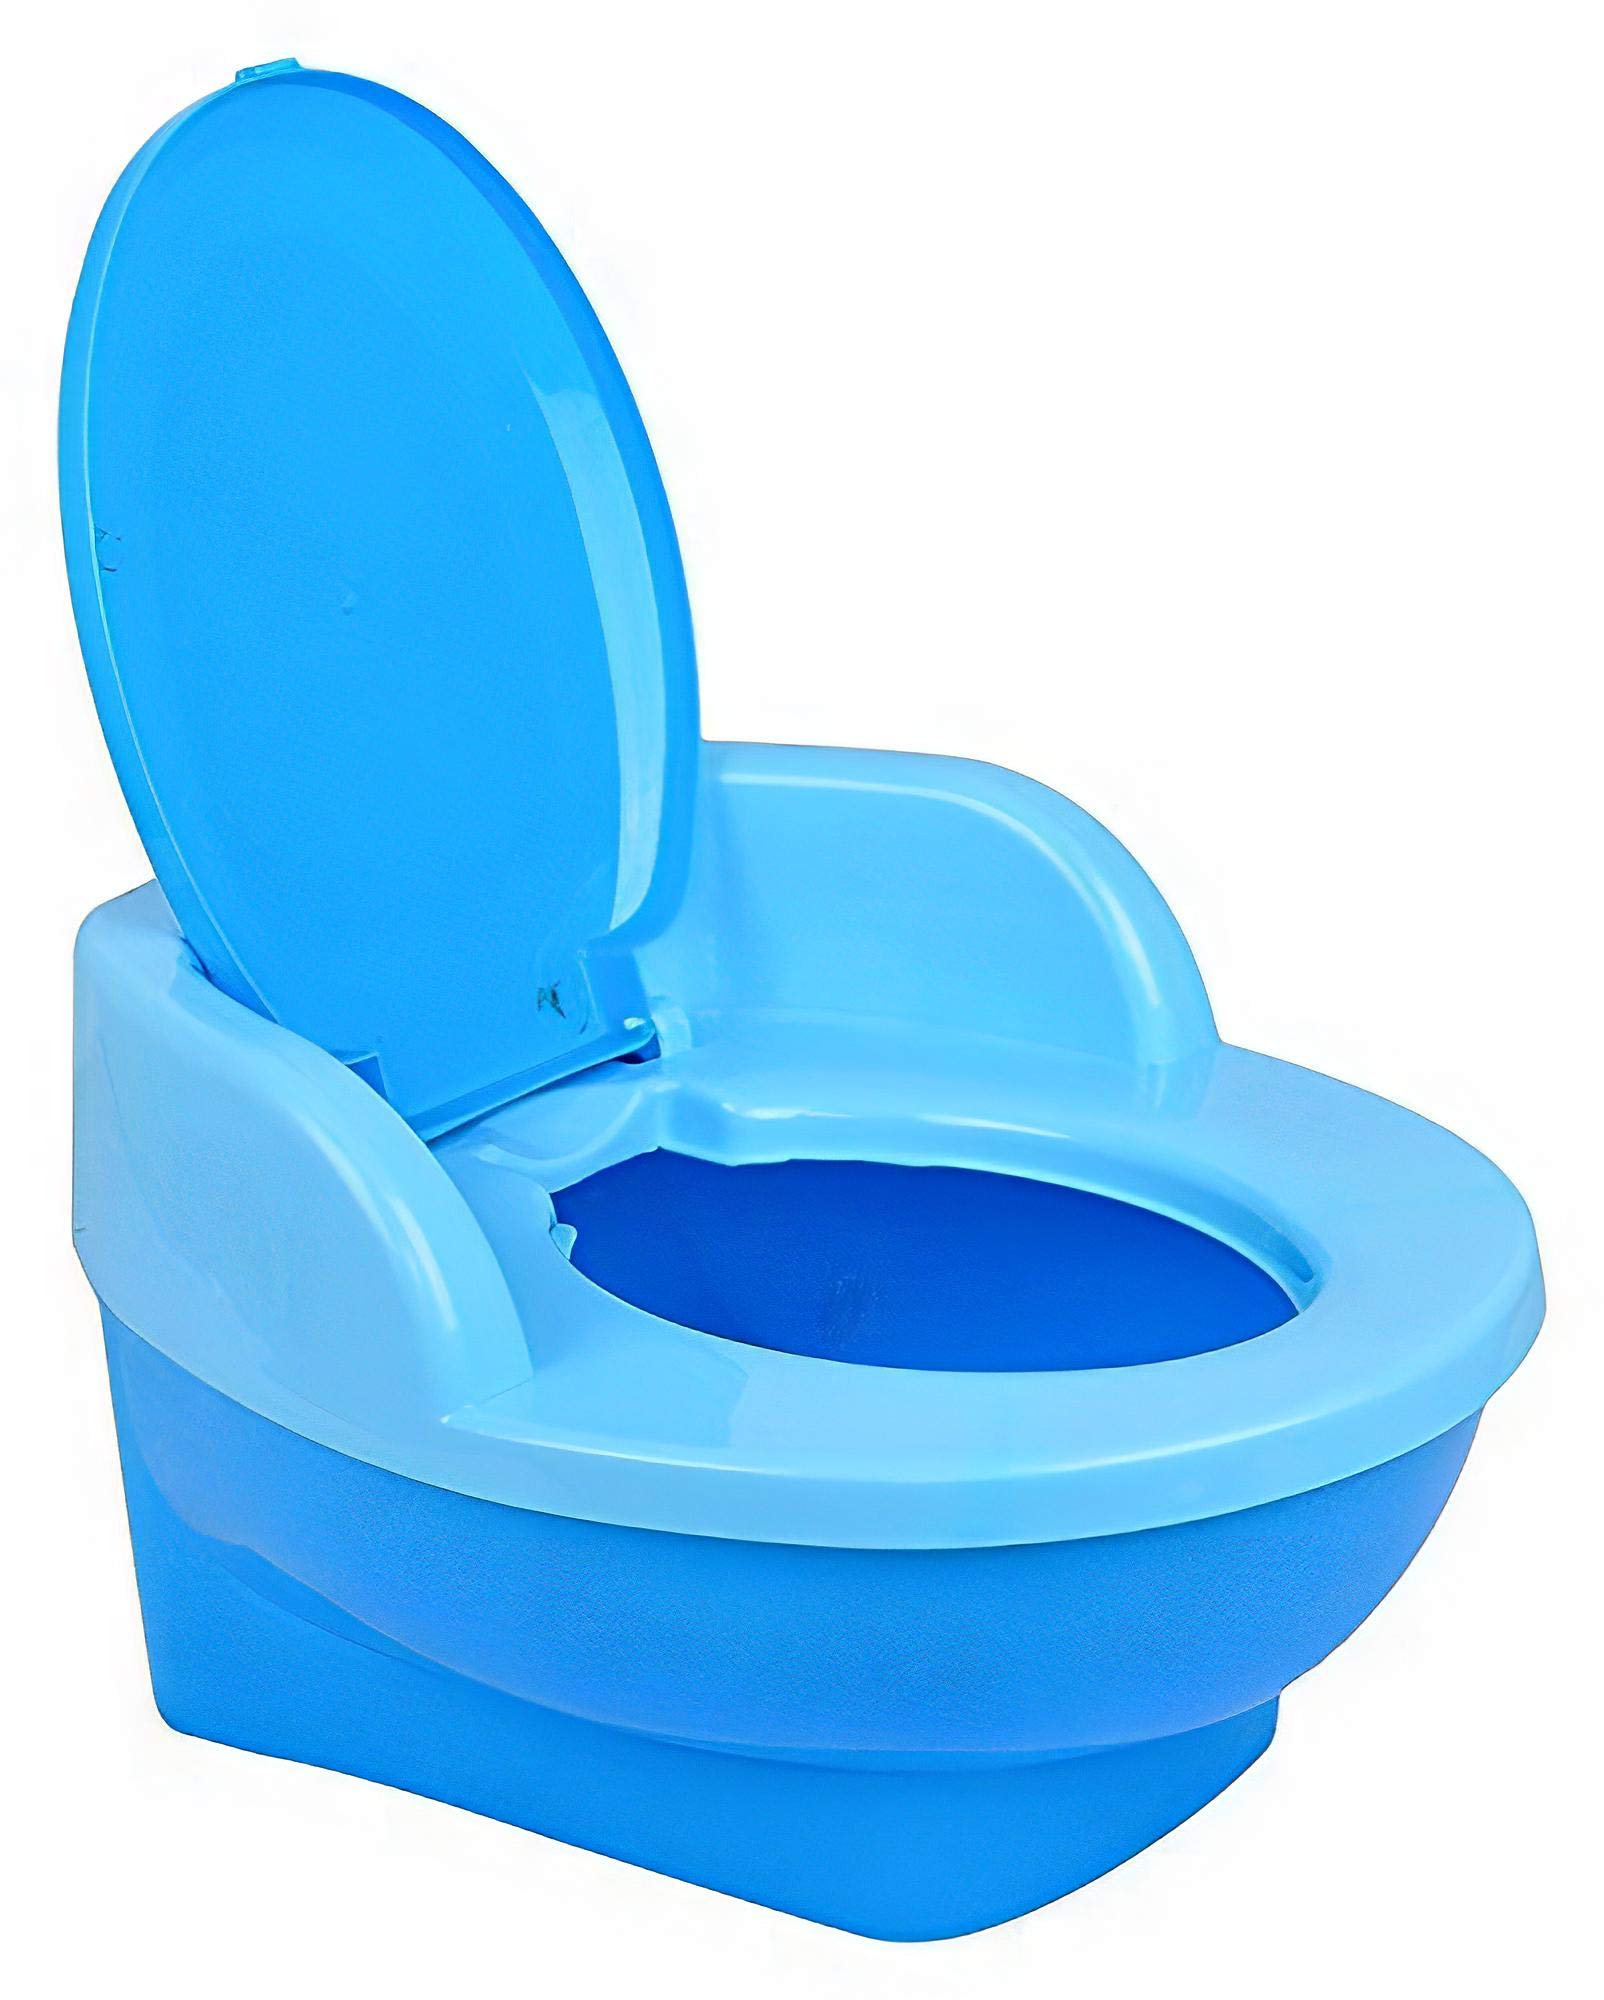 baby toilet seat nz Xendercage baby toilet training potty seat with upper closing lid with